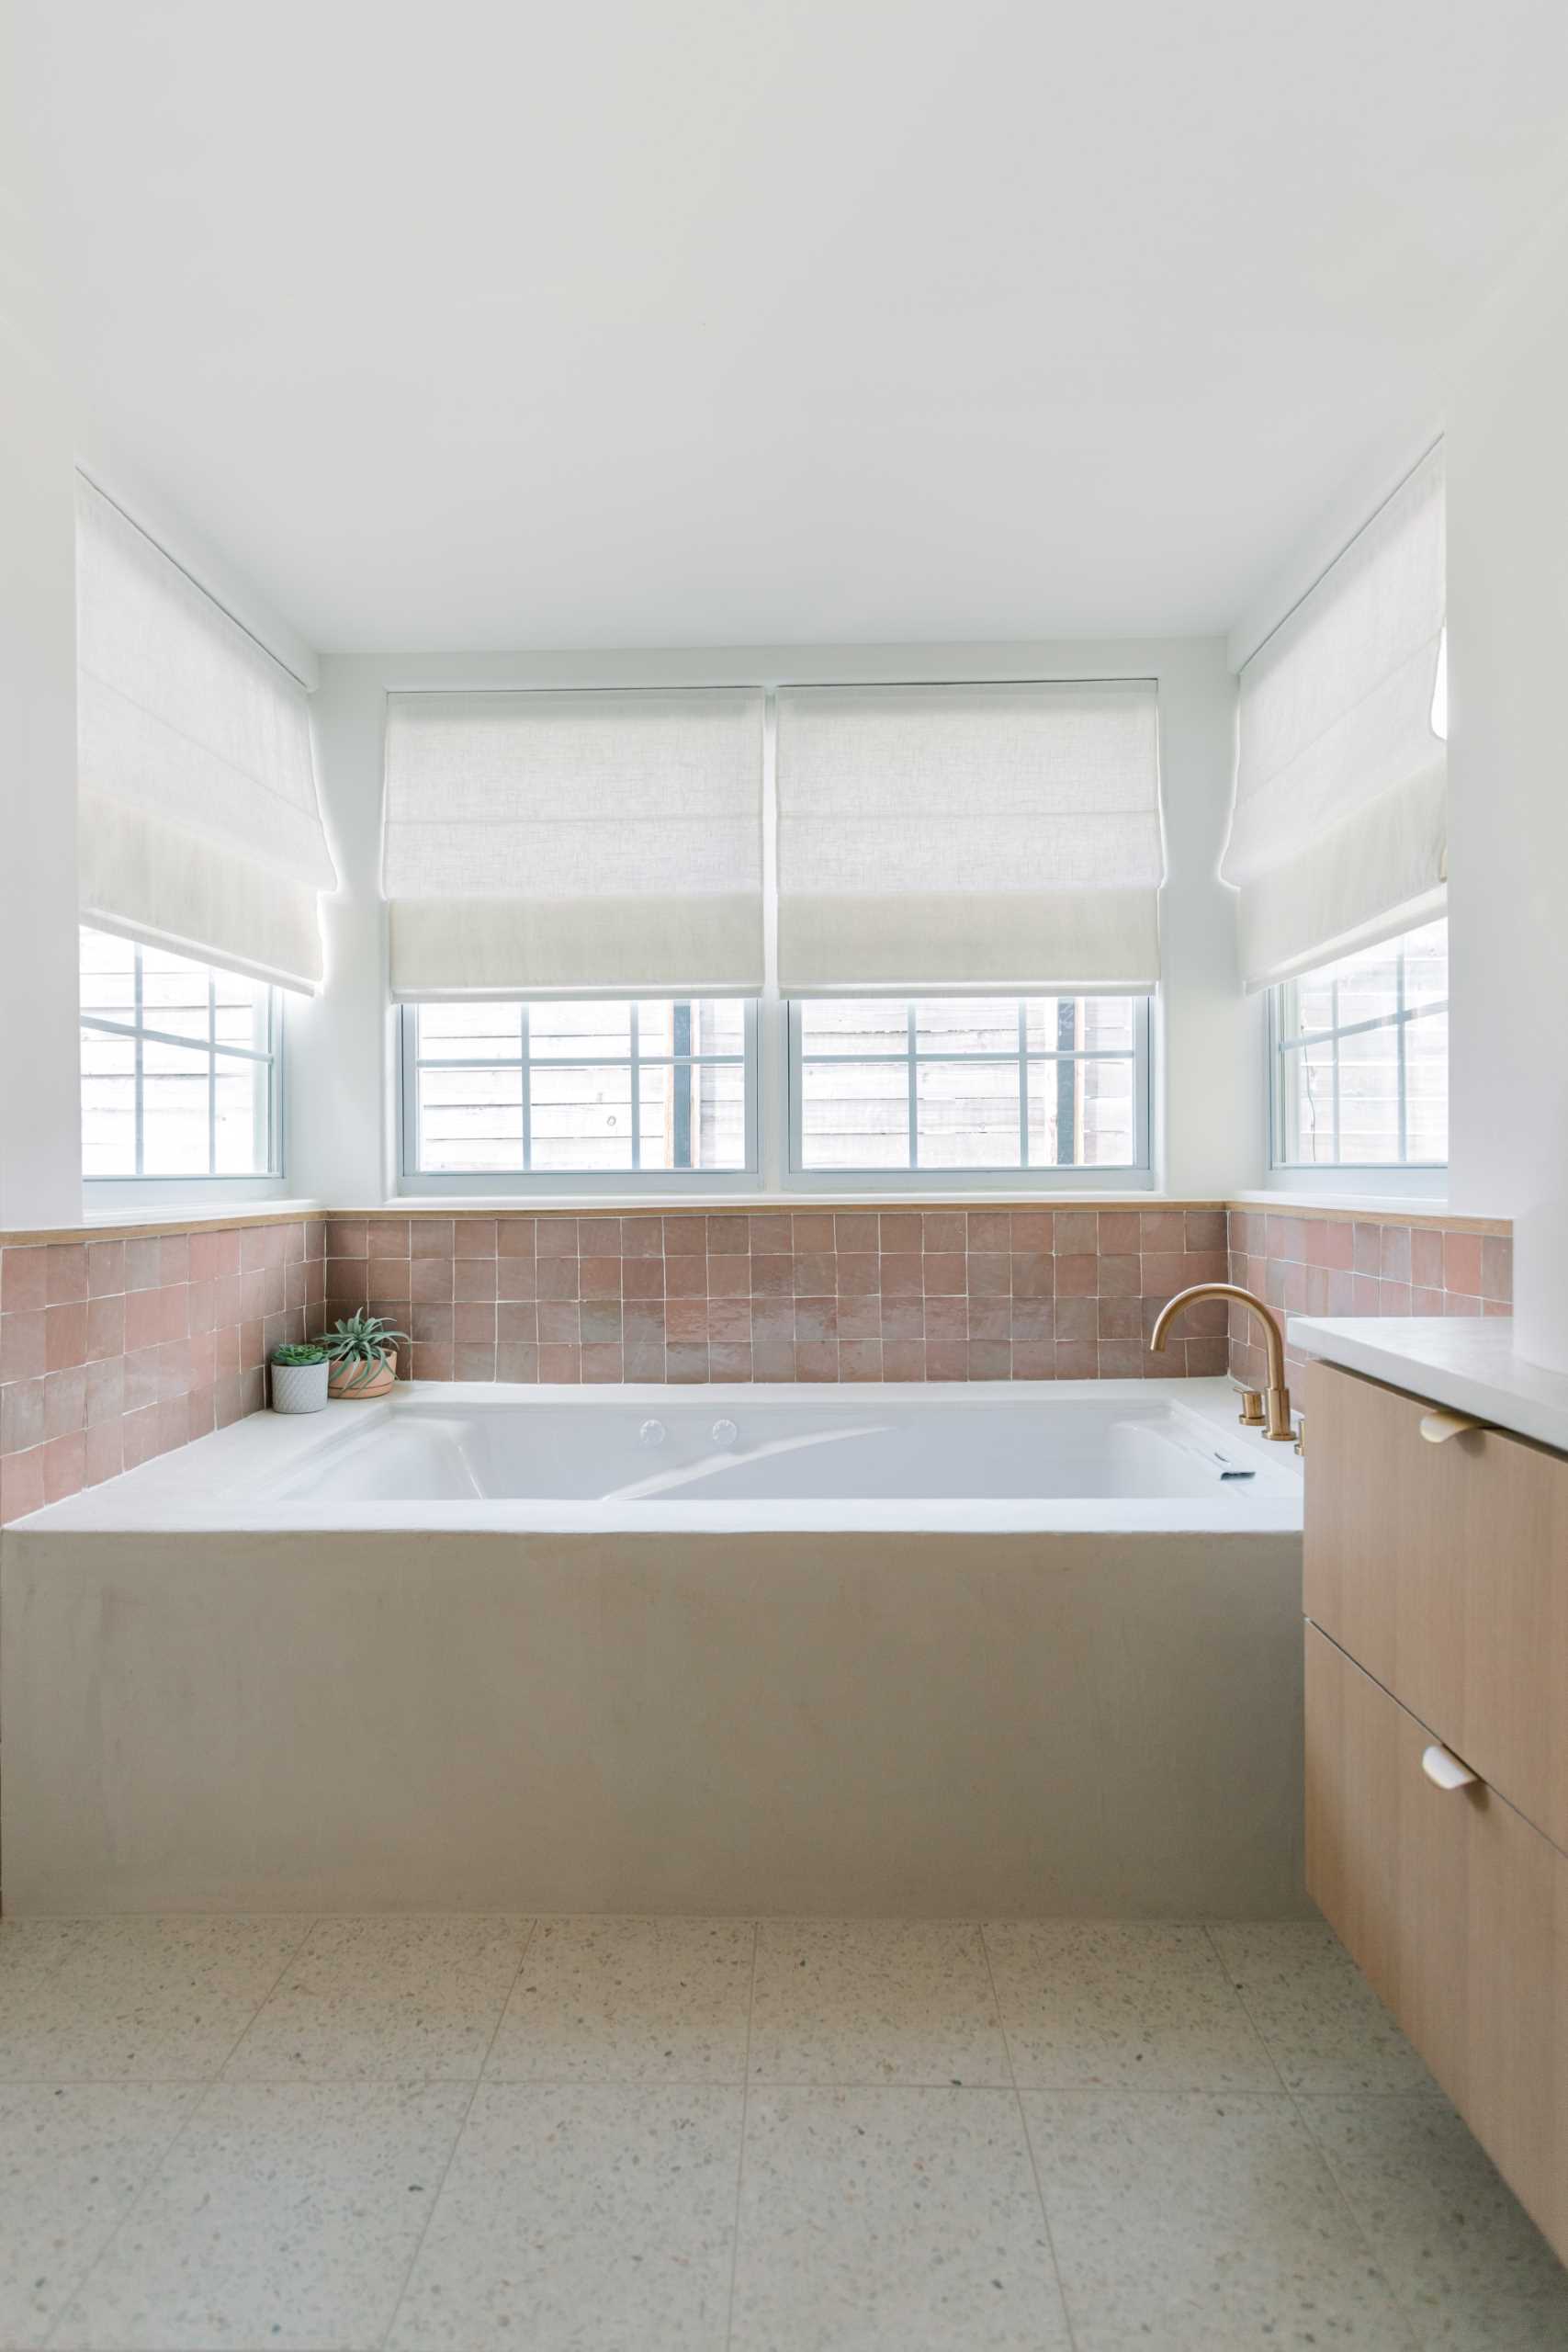 A contemporary bathroom with built-in bathtub and zellige tile surround.